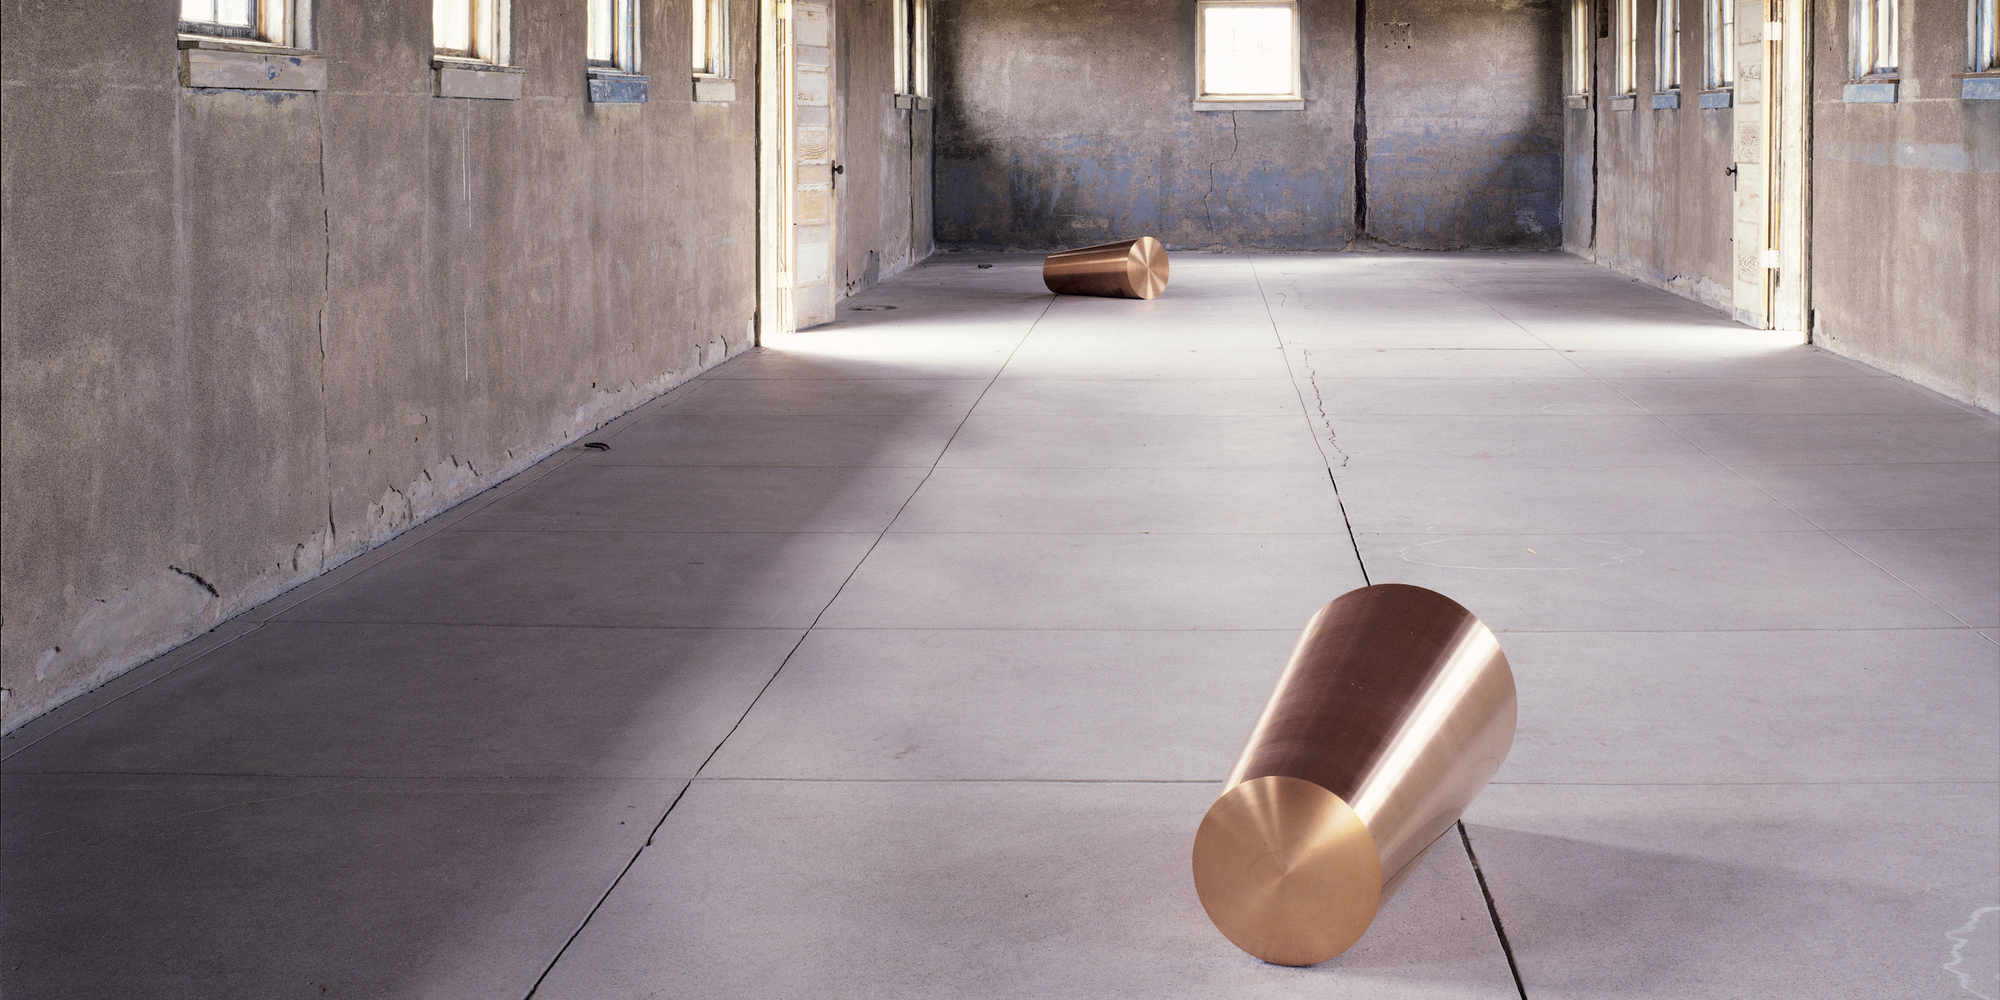 Roni Horn. Things That Happen Again, Pair Object VII (For a Here and a There). 1986–88. On long-term loan from Judd Foundation. The Chinati Foundation, Marfa, Texas. Photo: Florian Holzherr. Courtesy the Chinati Foundation. ©️ 2020 Roni Horn, New York